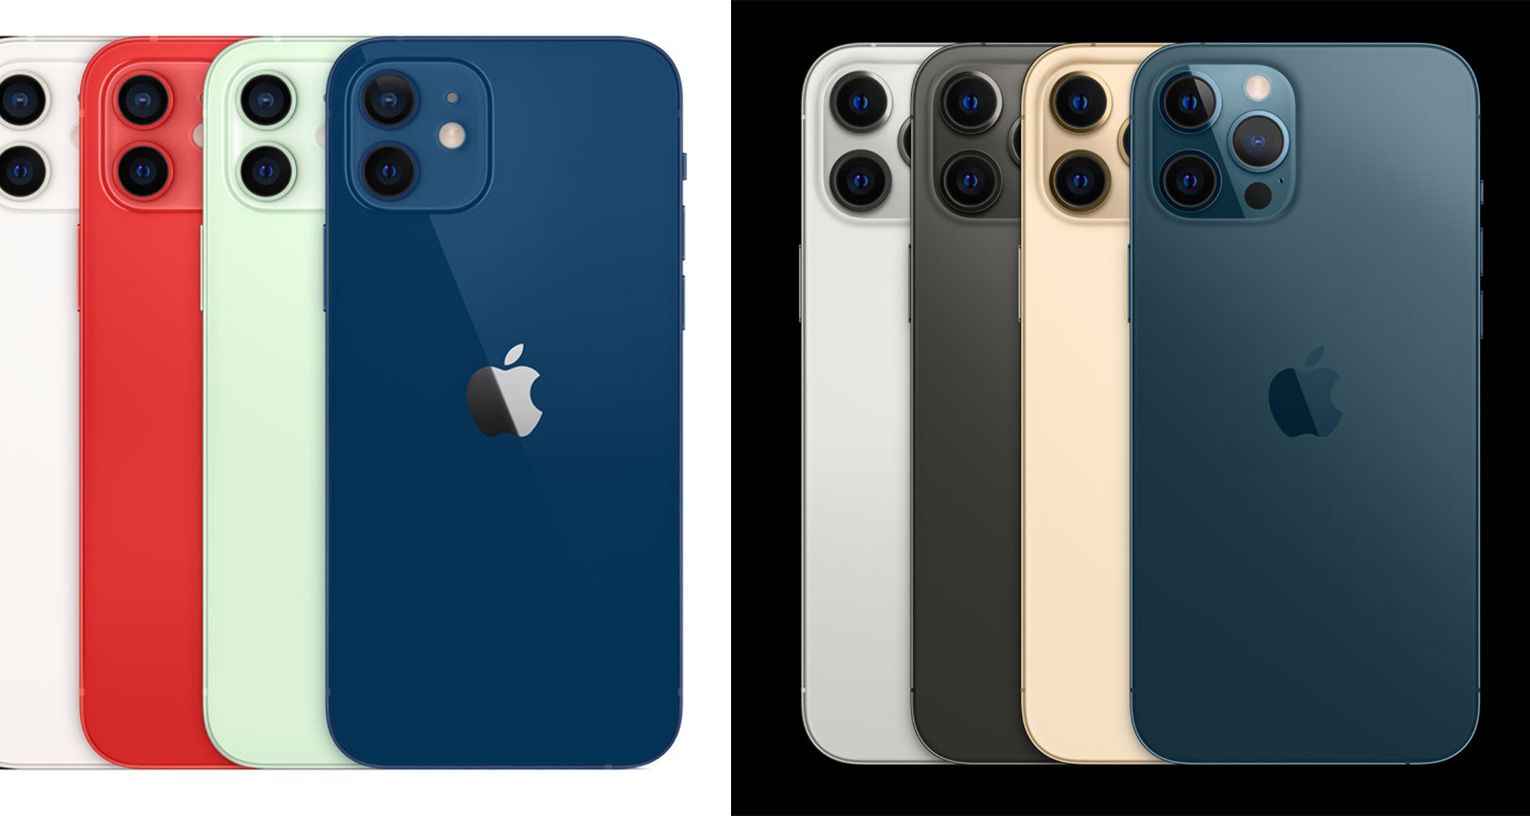 ​The iPhone 12 (left) and iPhone 12 Pro (right)